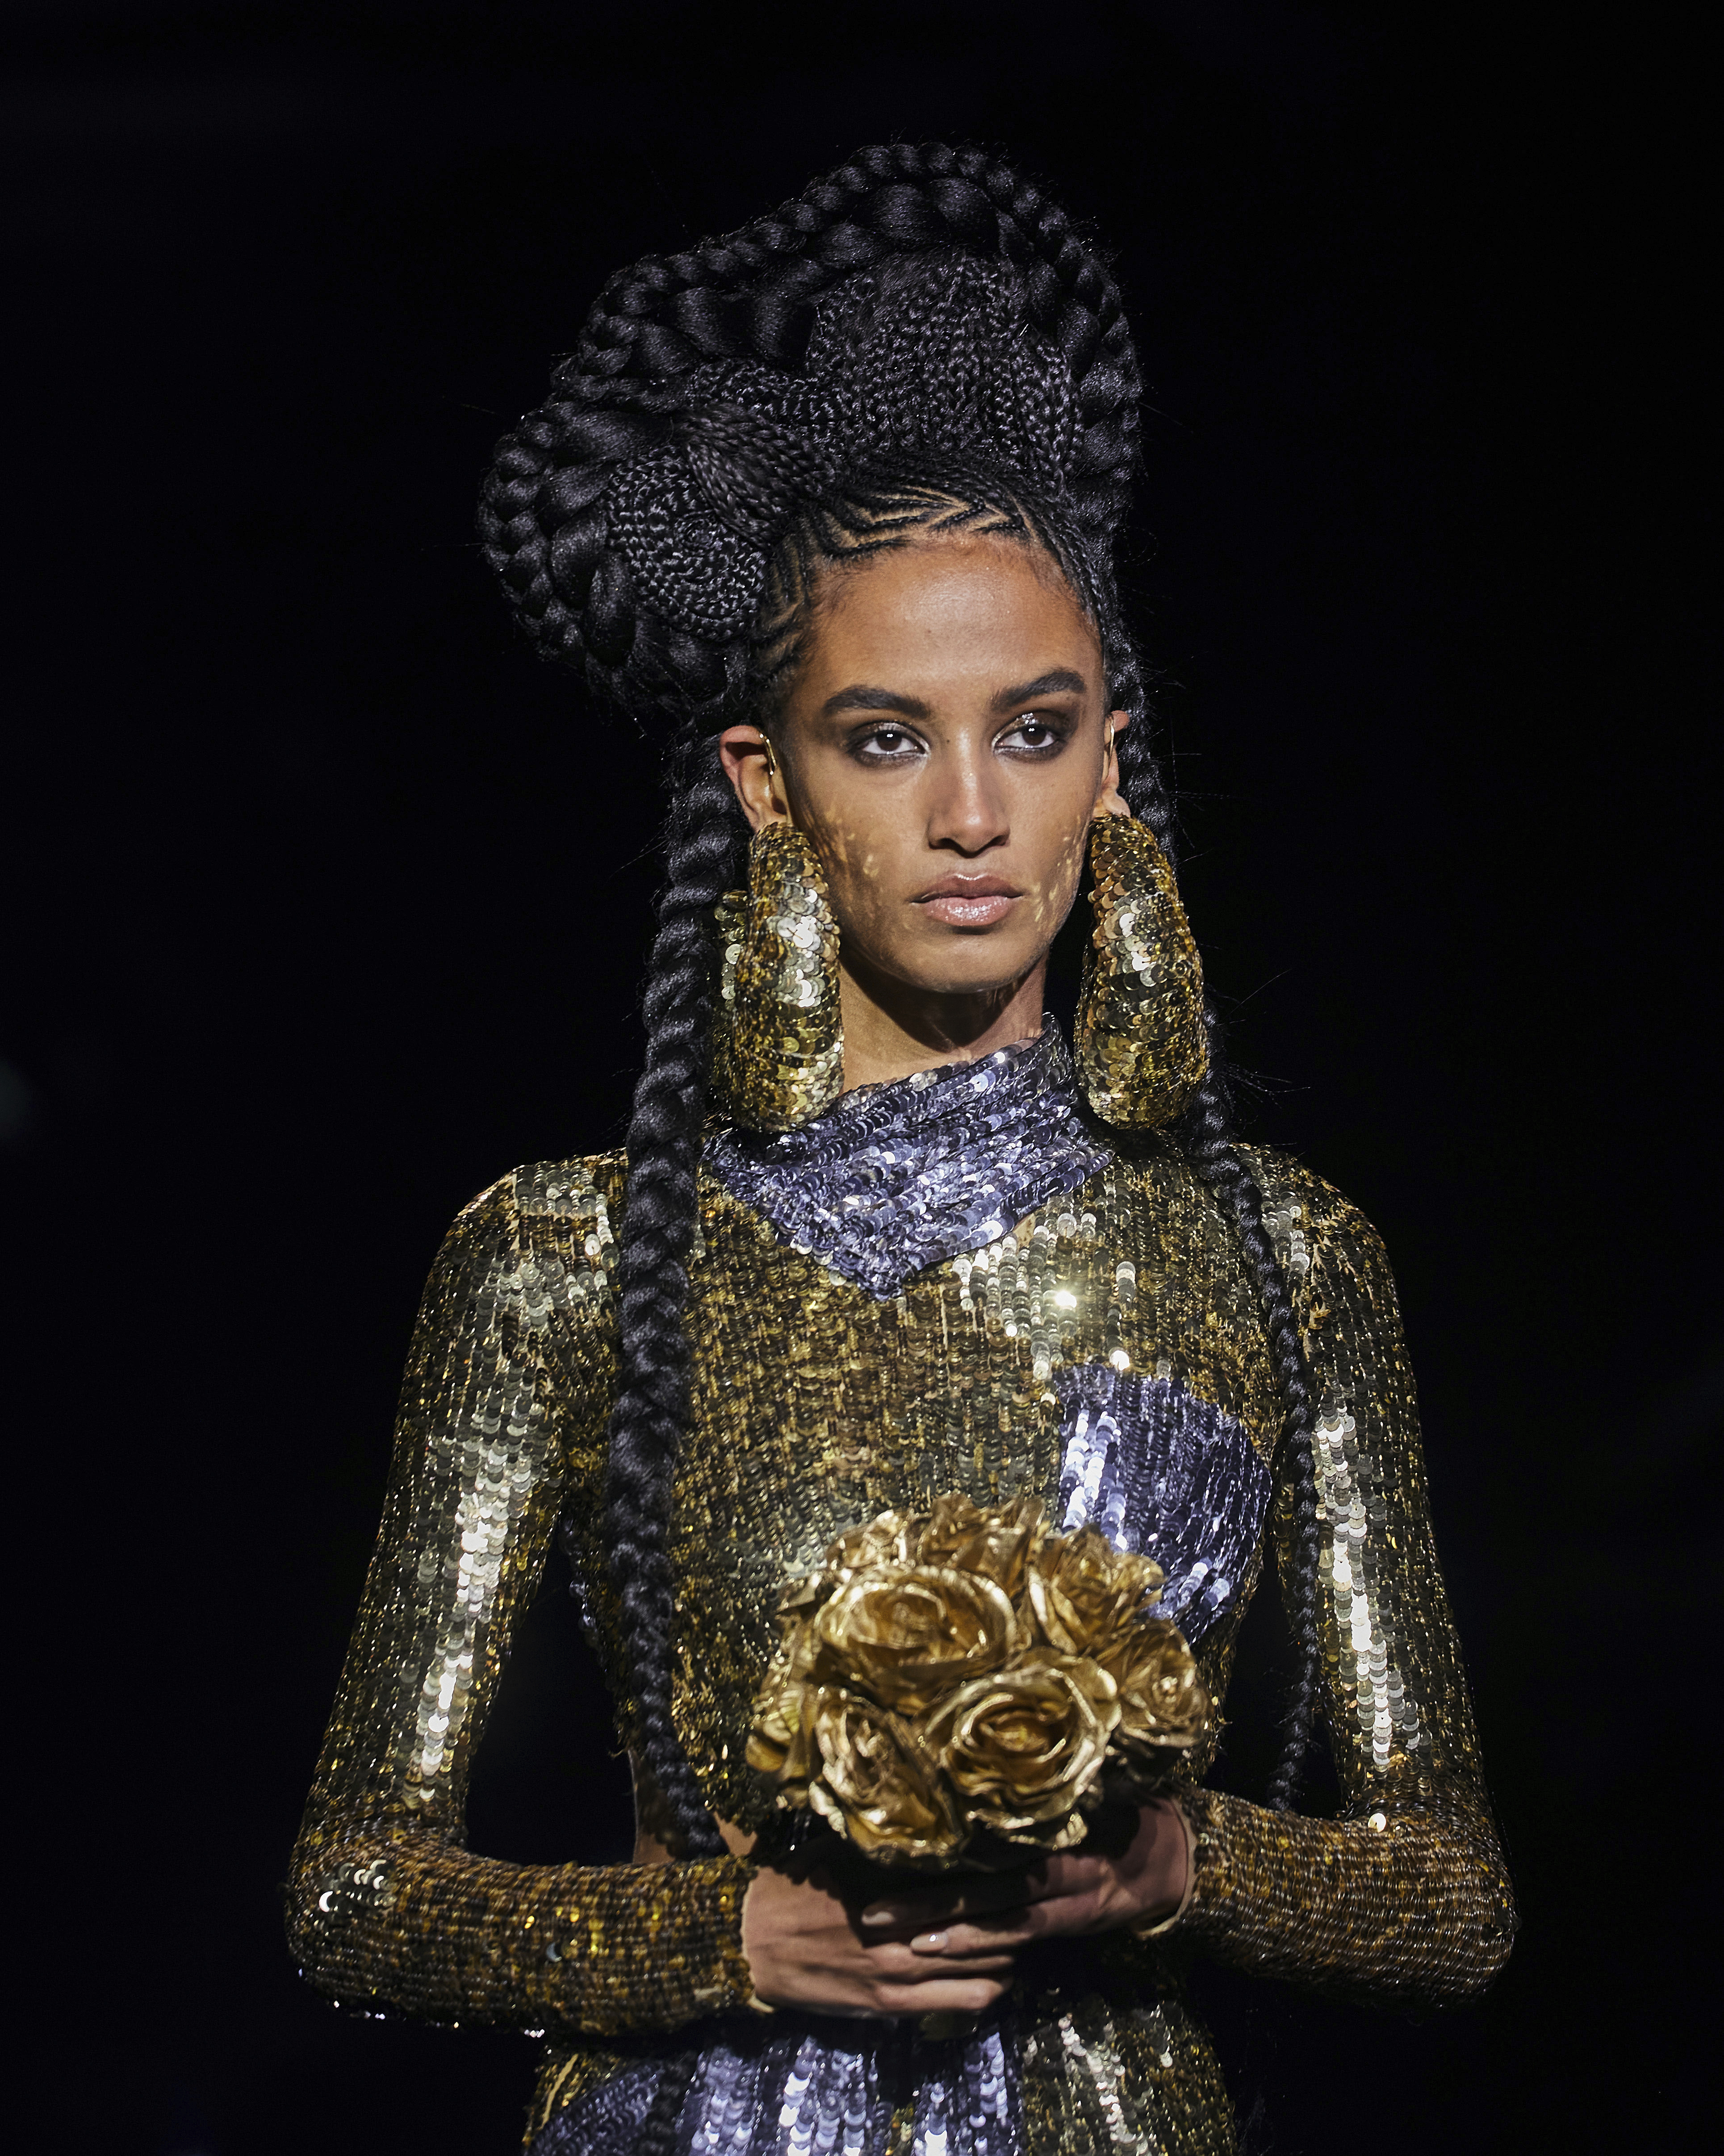 Tom Ford closes Fashion Week with big hair, miles of sparkle - WTOP News